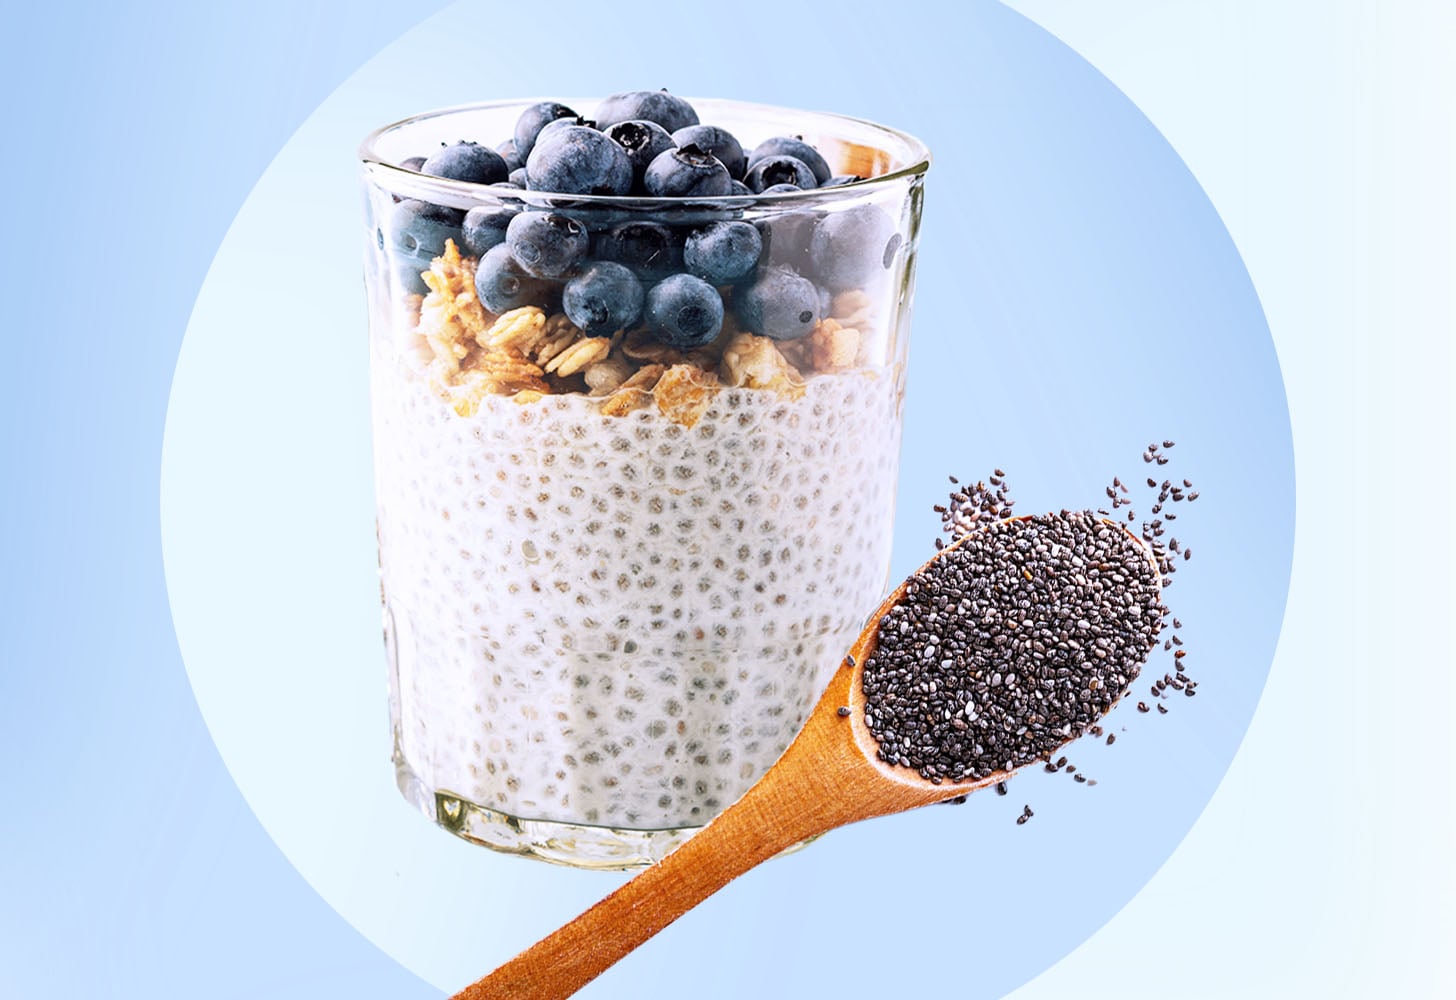 Photo of chia seed pudding to show how to eat chia seeds: are chia seeds good for you?